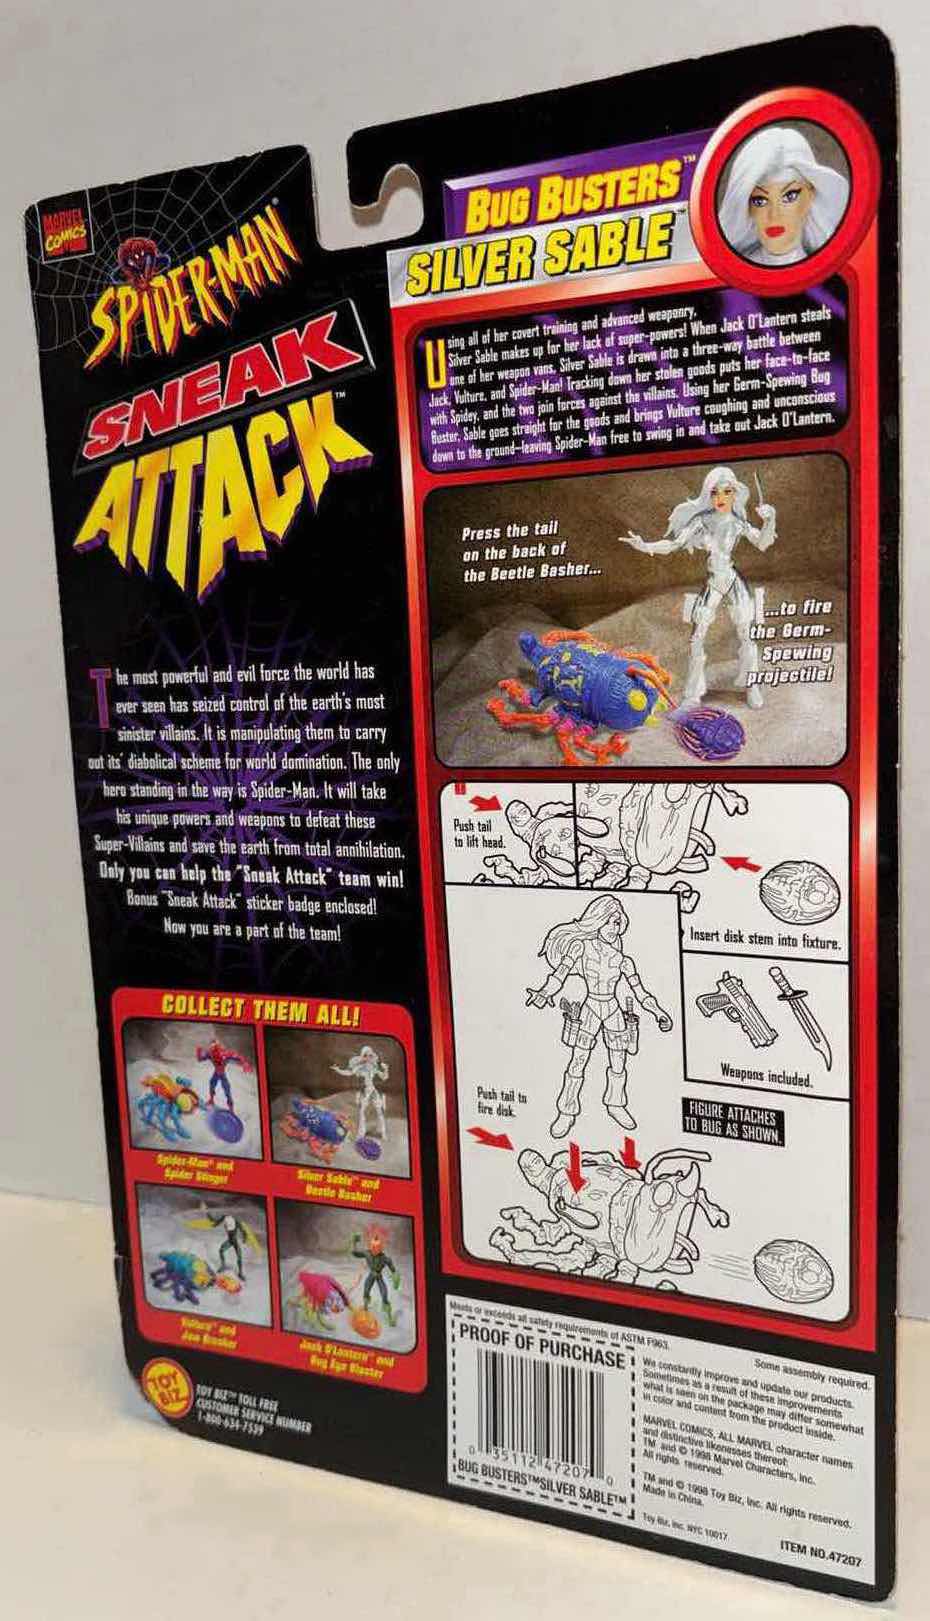 Photo 2 of NEW 1998 TOY BIZ MARVEL COMICS SPIDER-MAN SNEAK ATTACK BUG BUSTERS ACTION FIGURE & ACCESSORIES “SILVER SABLE AND BEETLE BASHER”